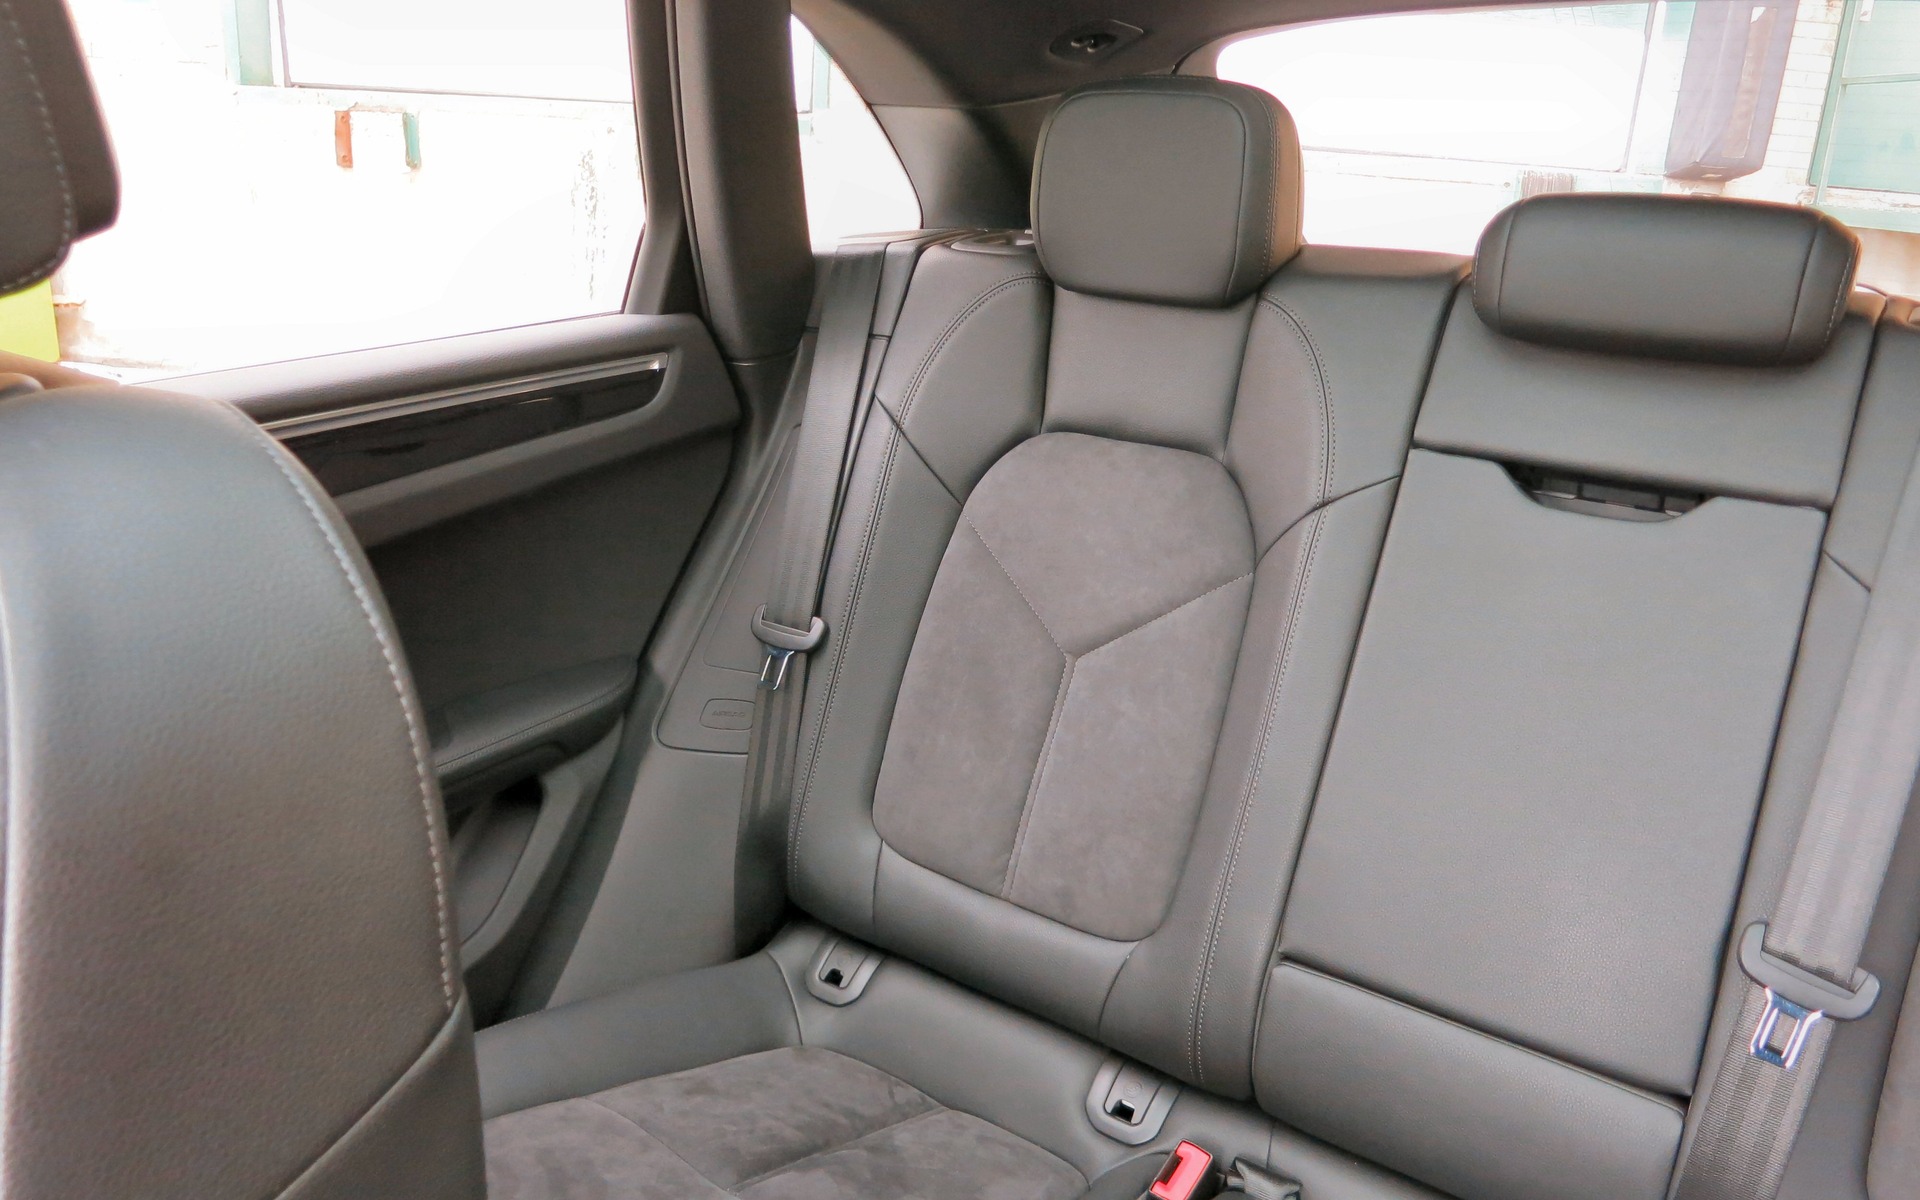 The rear seat folds flat to offer a decent amount of cargo space.